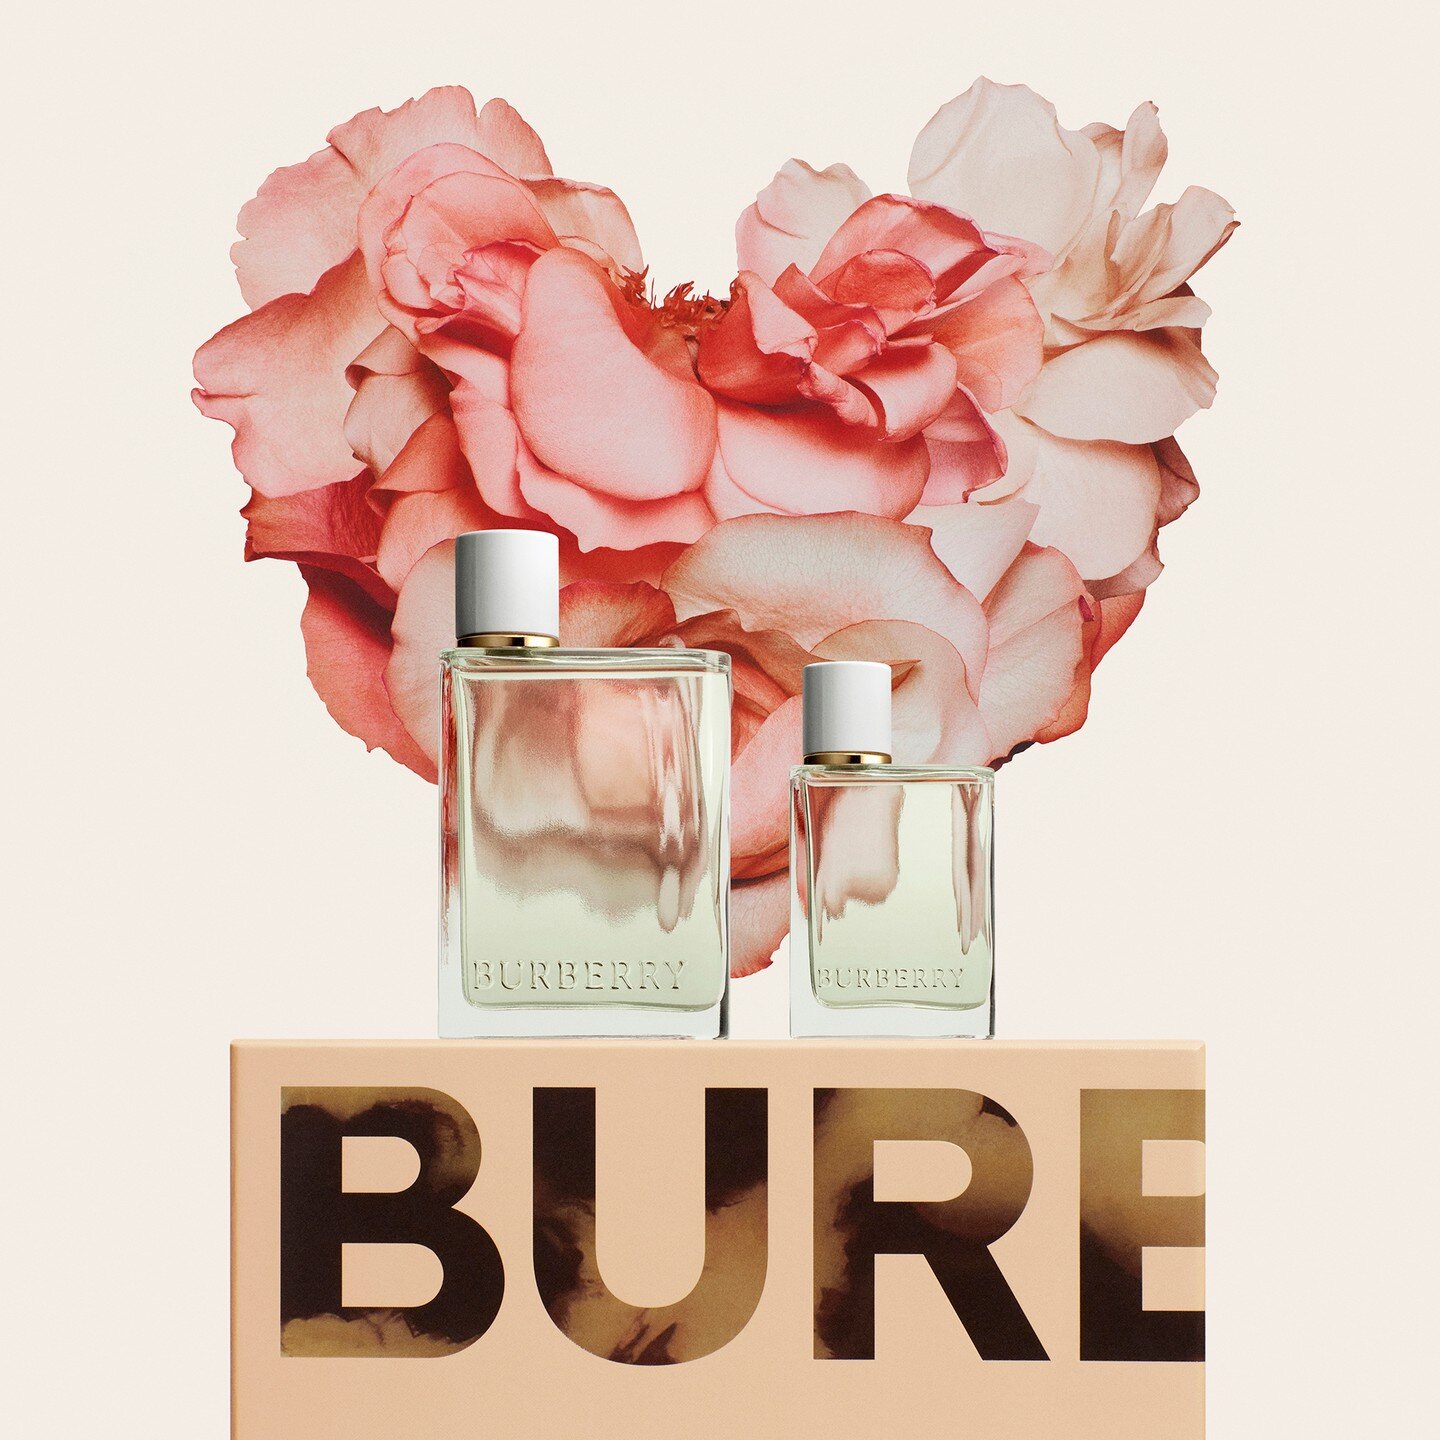 Pamper your loved ones with Buberry fragrances. Featuring the sparkling Her Eau de Toilette, free-spirited Her Eau de Parfum and enigmatic Hero Eau de Toilette. All available at Luxe Duty Free.